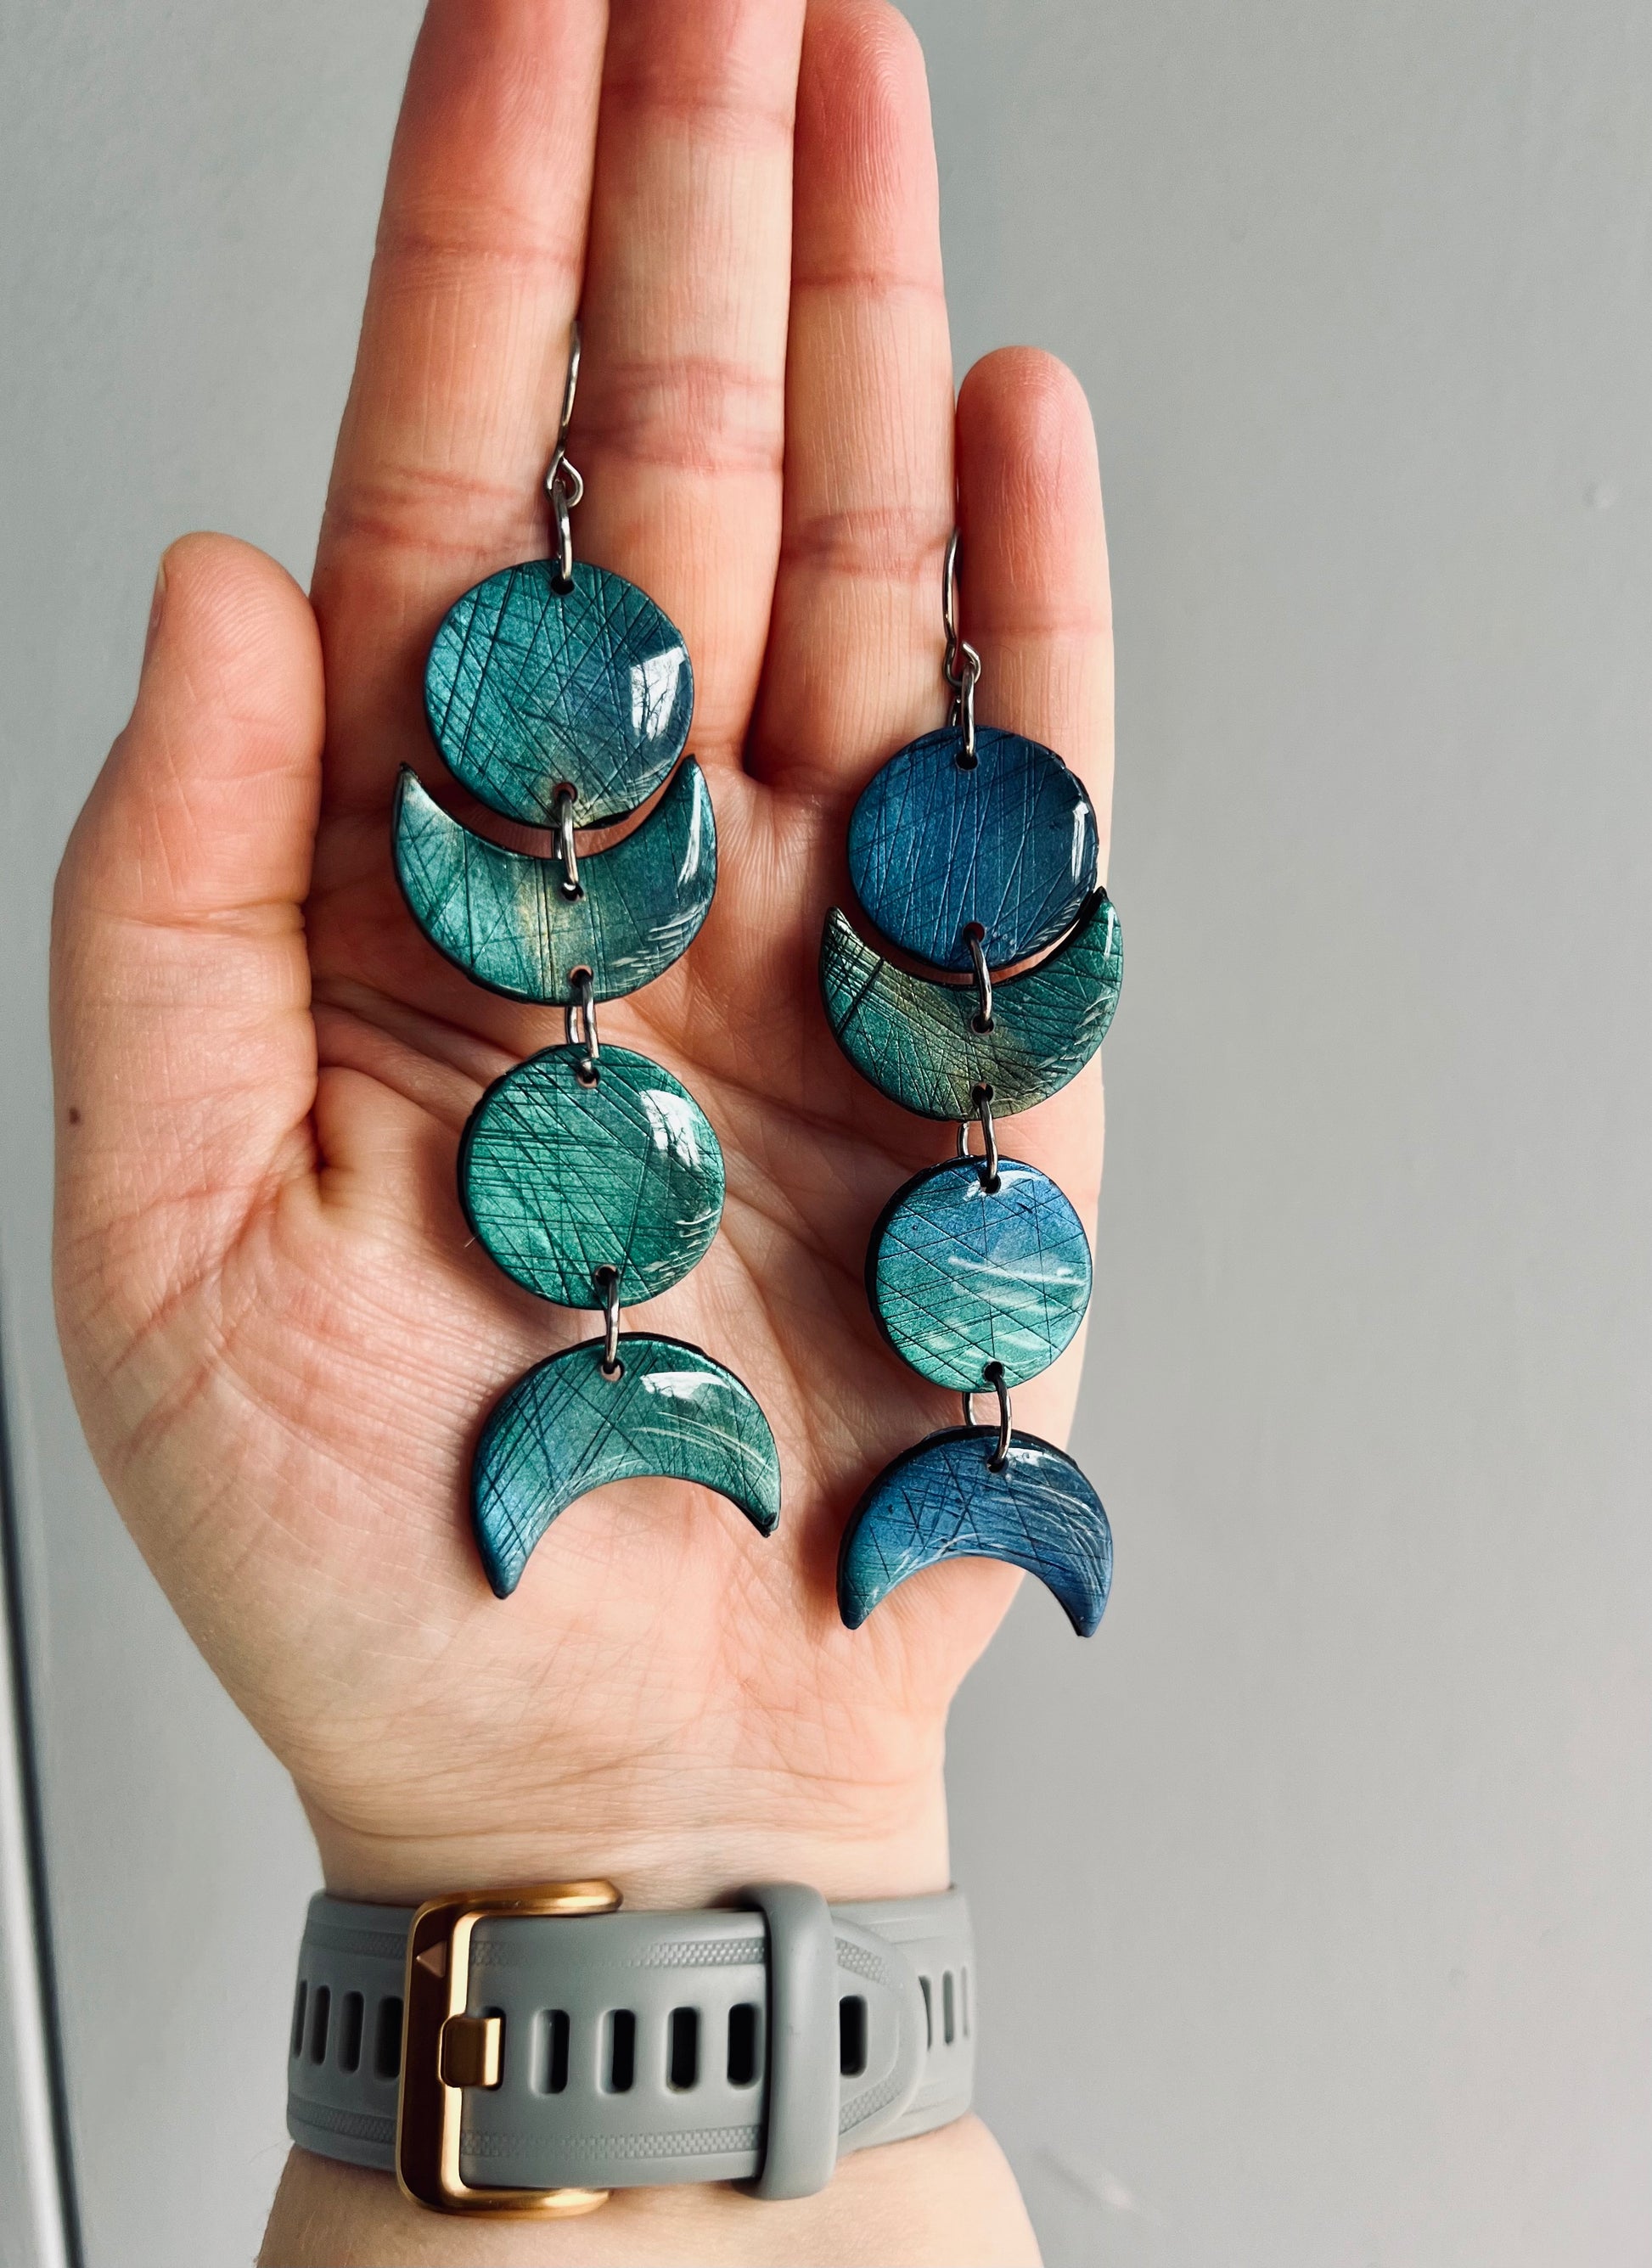 Elegant moon phase polymer clay earrings adorned with mica pigments, echoing the enchanting hues of labradorite. Infused with the healing energies of labradorite, these earrings bring balance and protection to your daily wear.